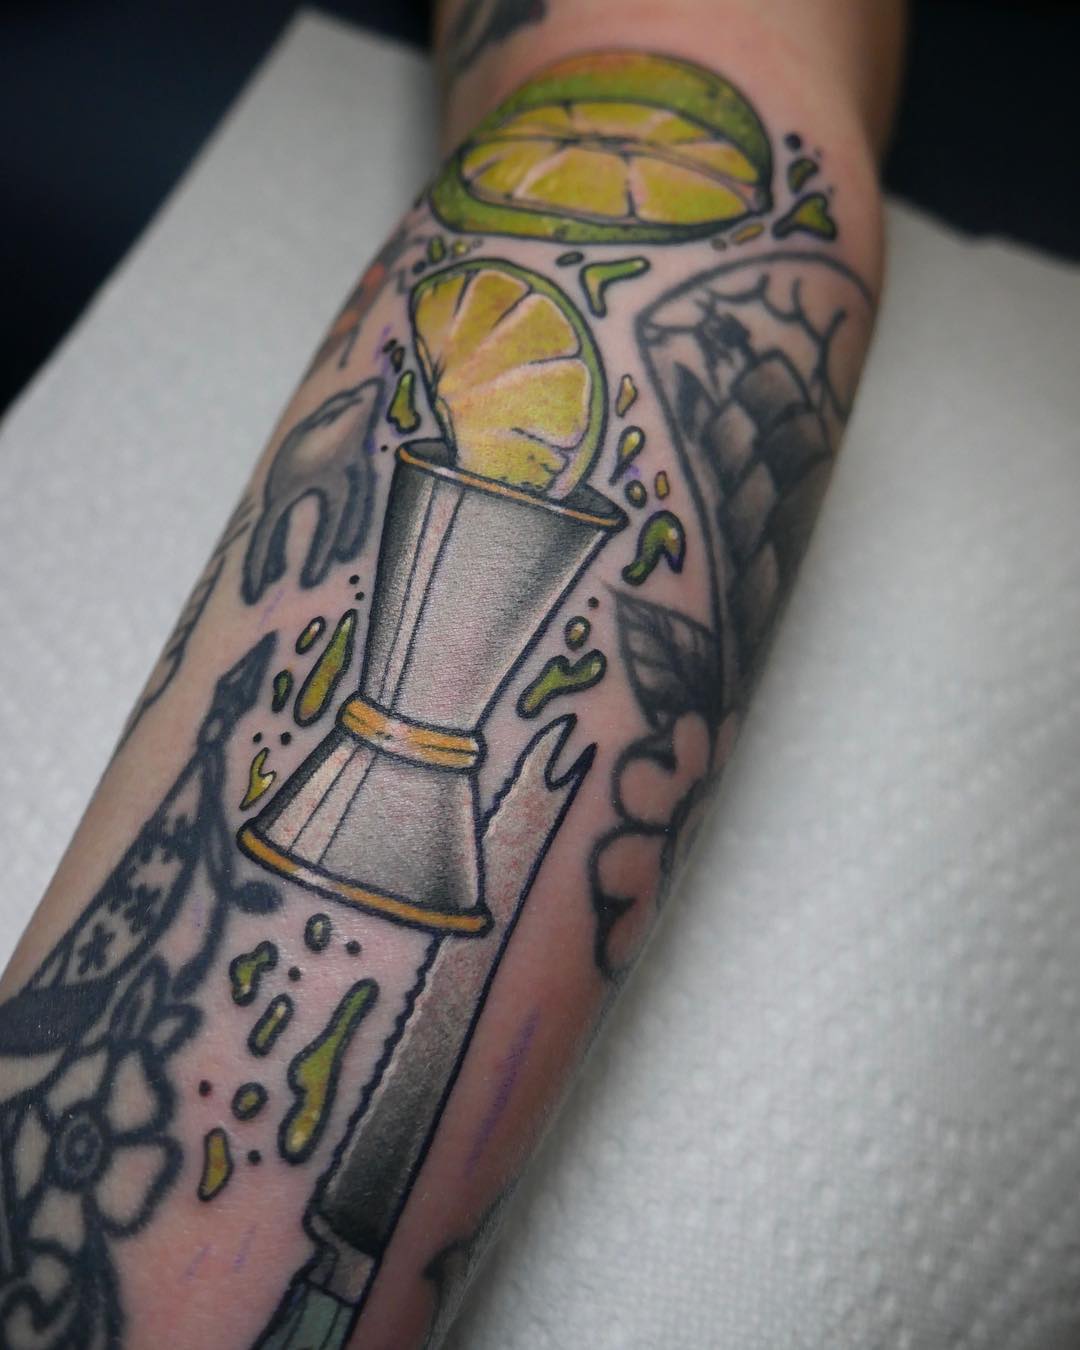 Limes and jigger tattoo by @patcrump